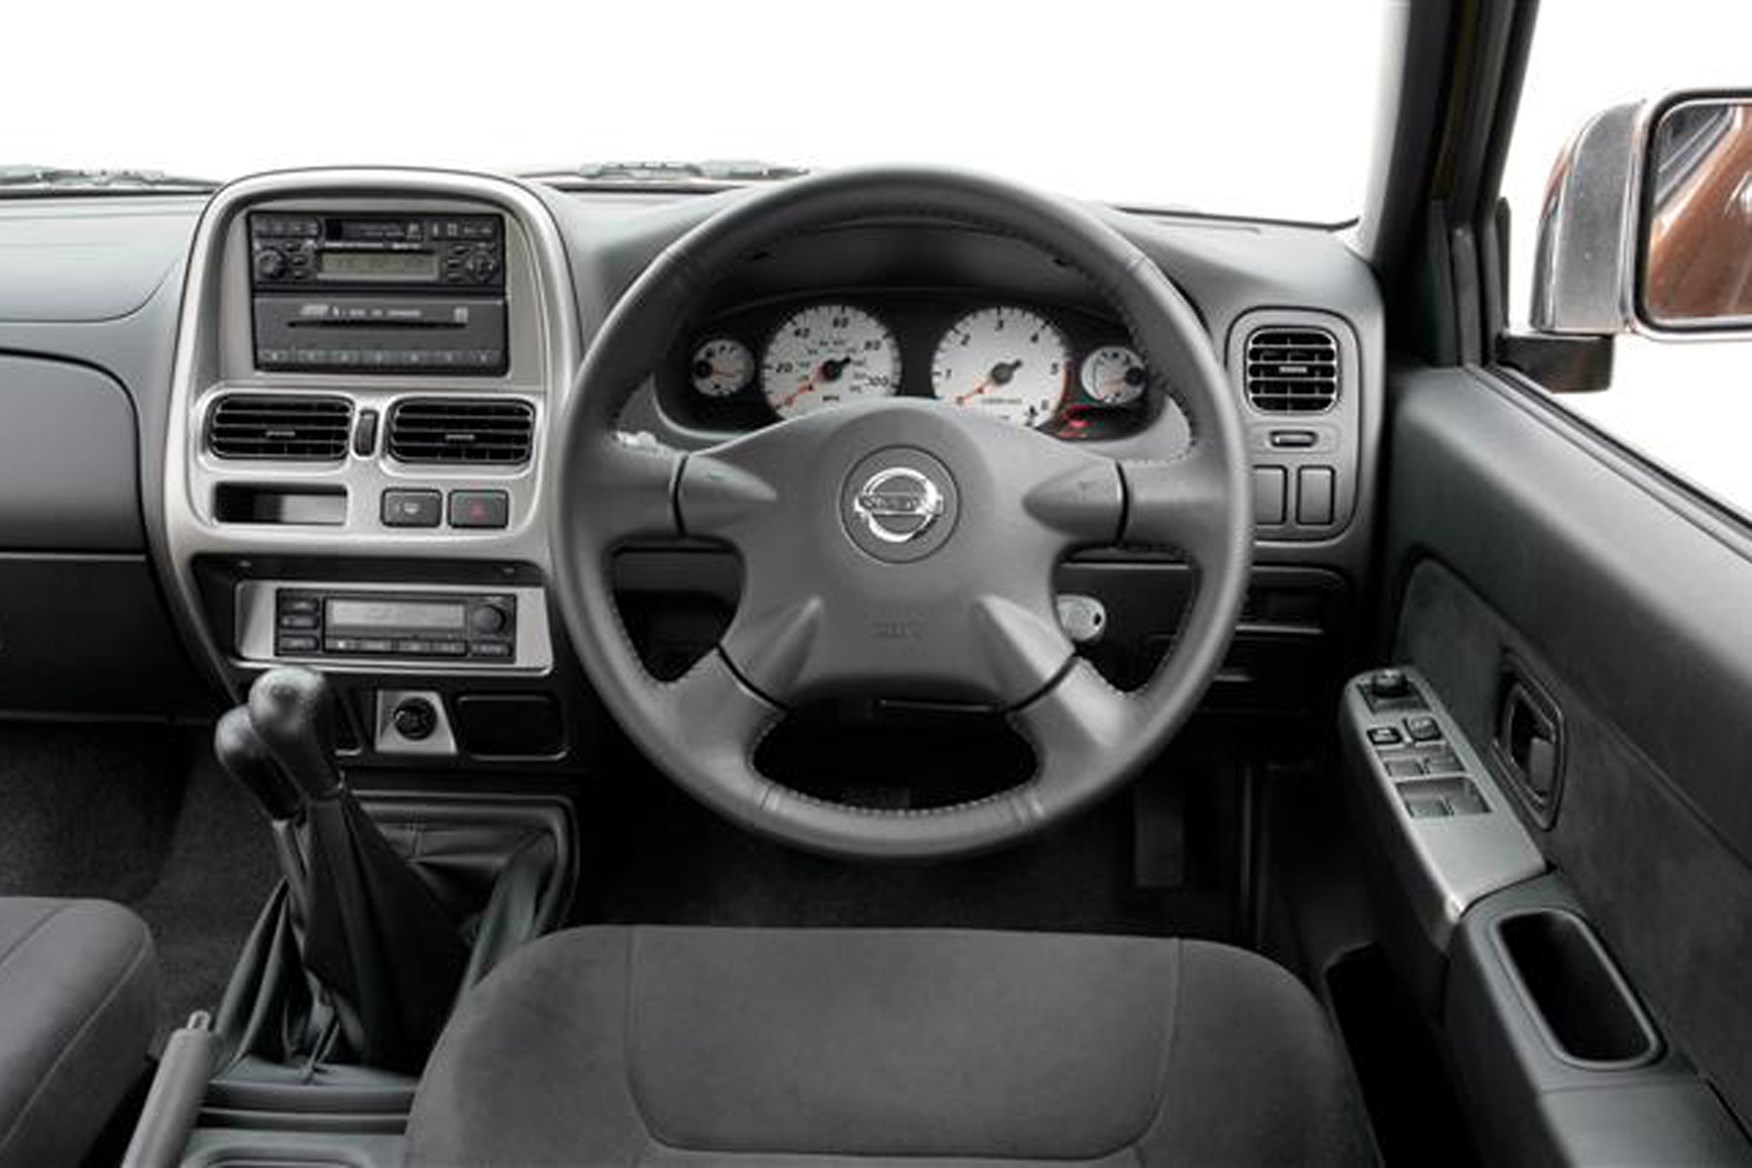 Nissan Navara 2001-2005 review on Parkers Vans - in the driver's seat